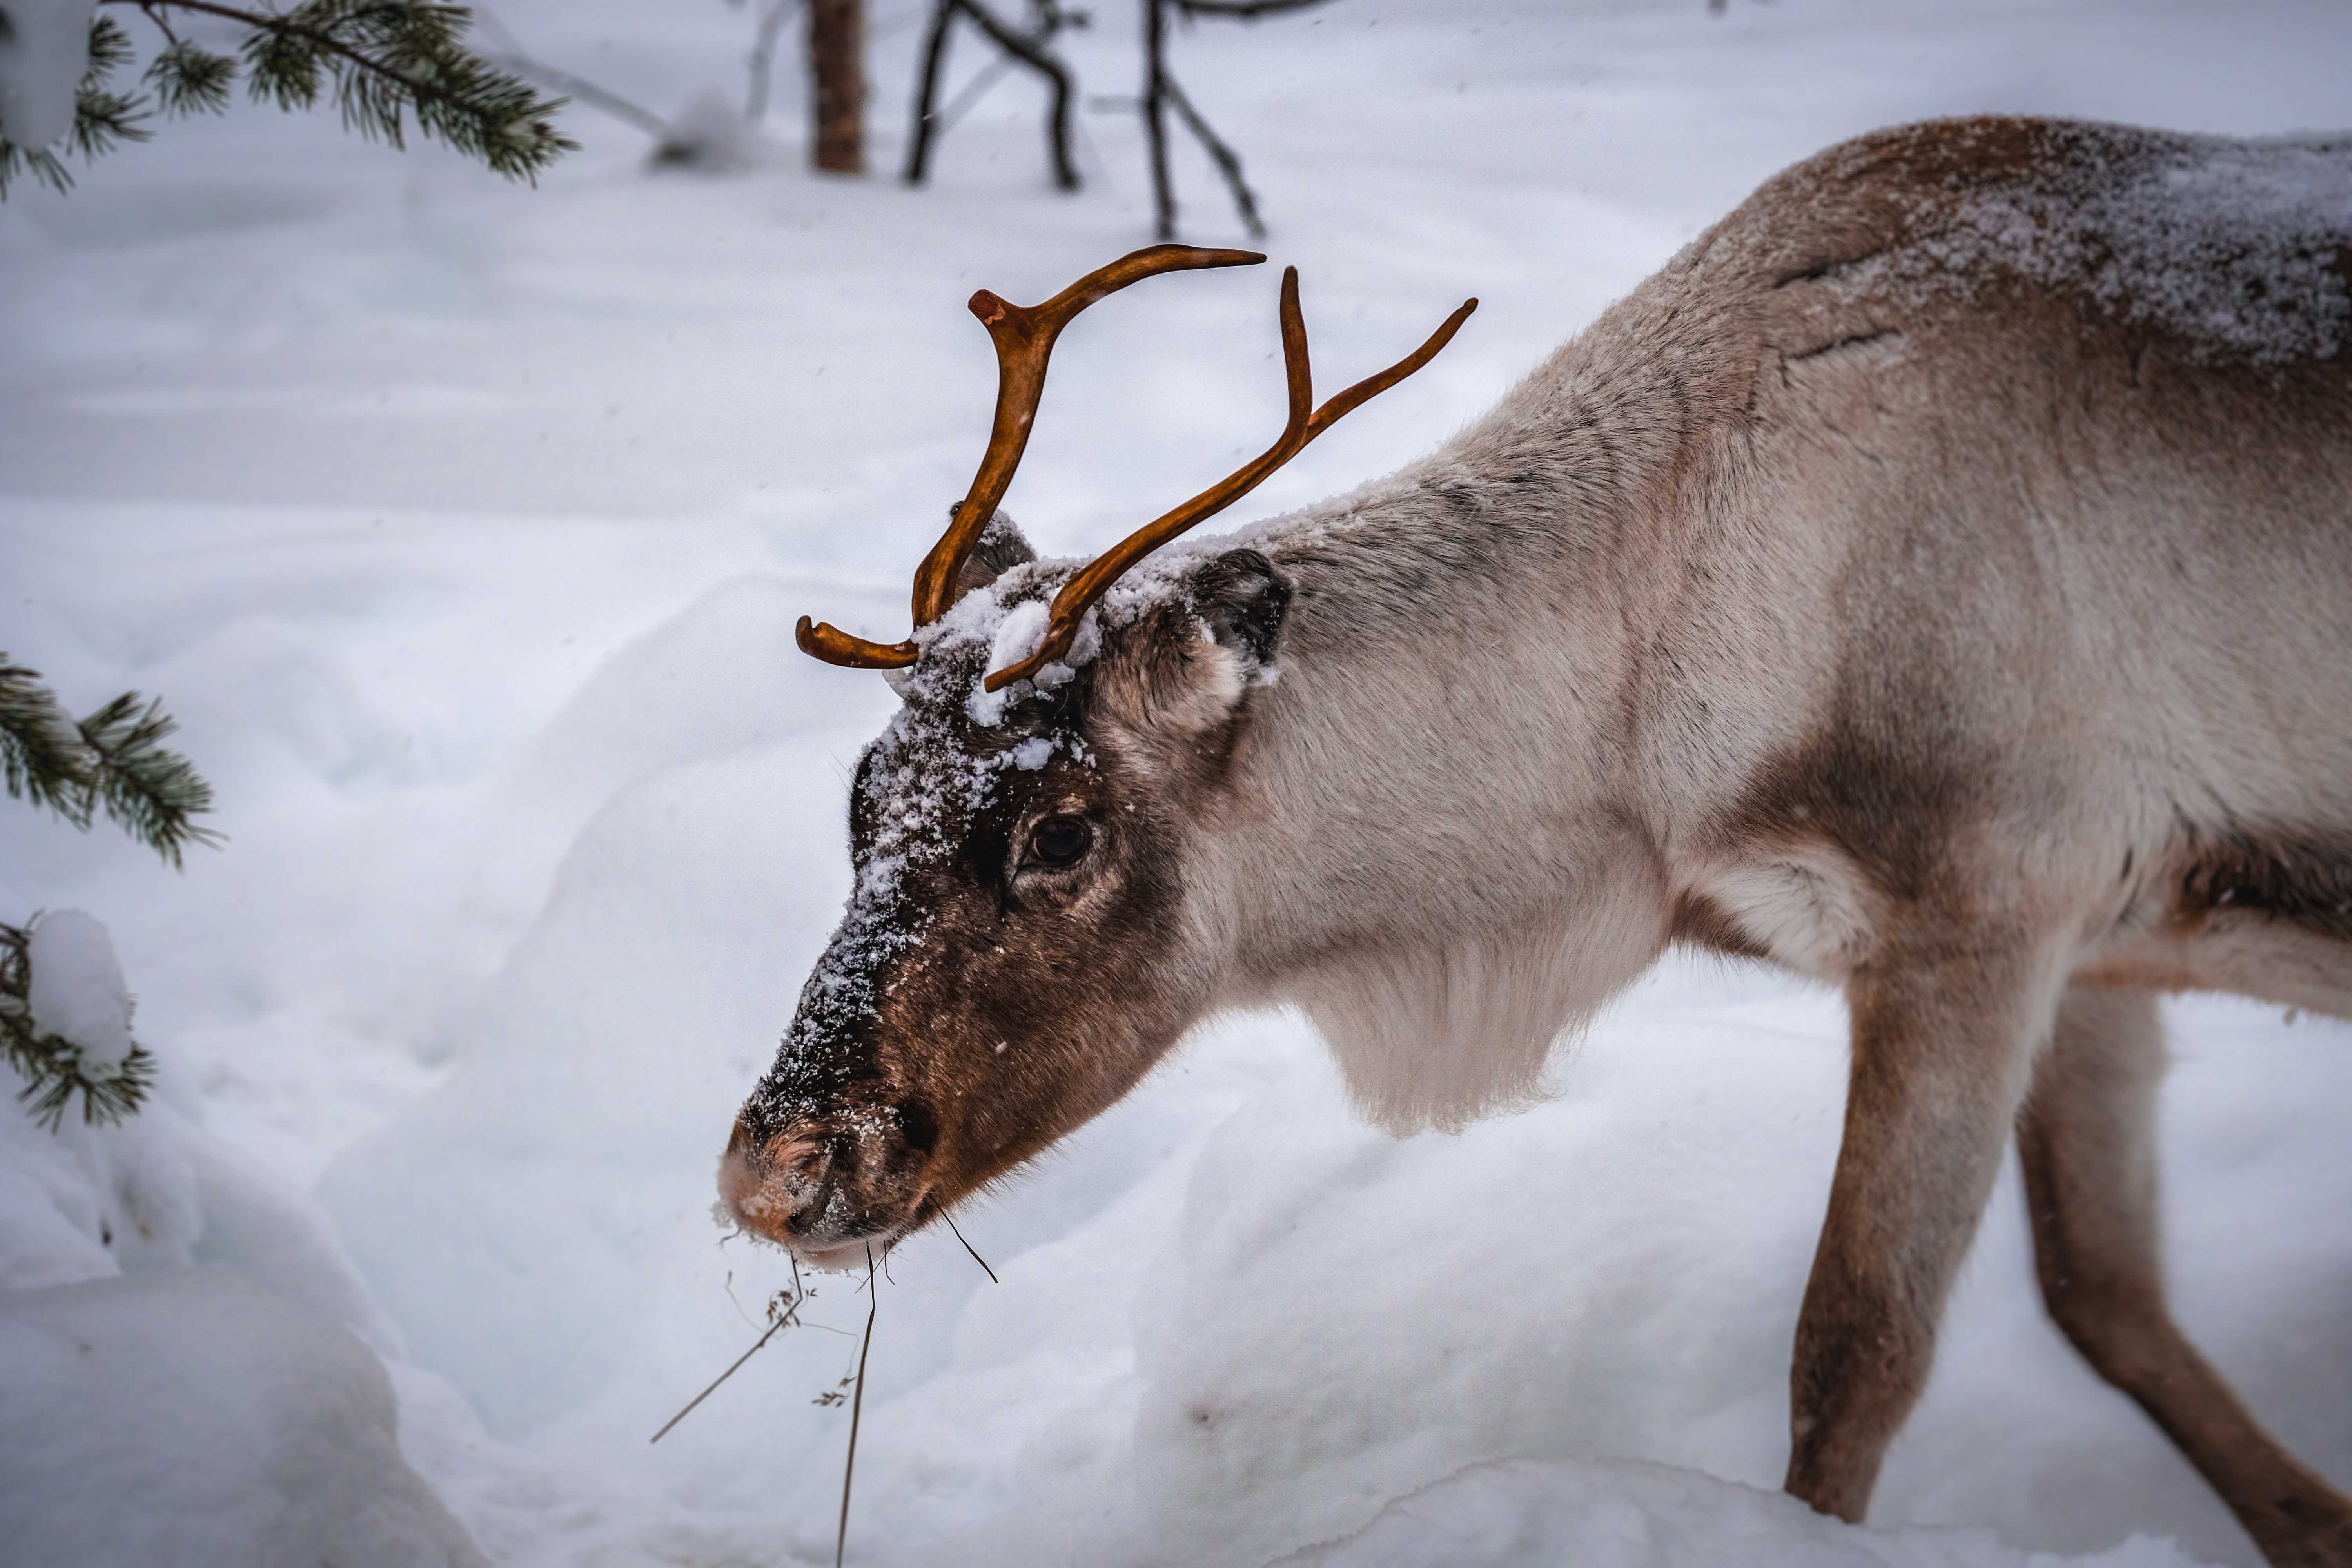 Animals that are found in Lapland